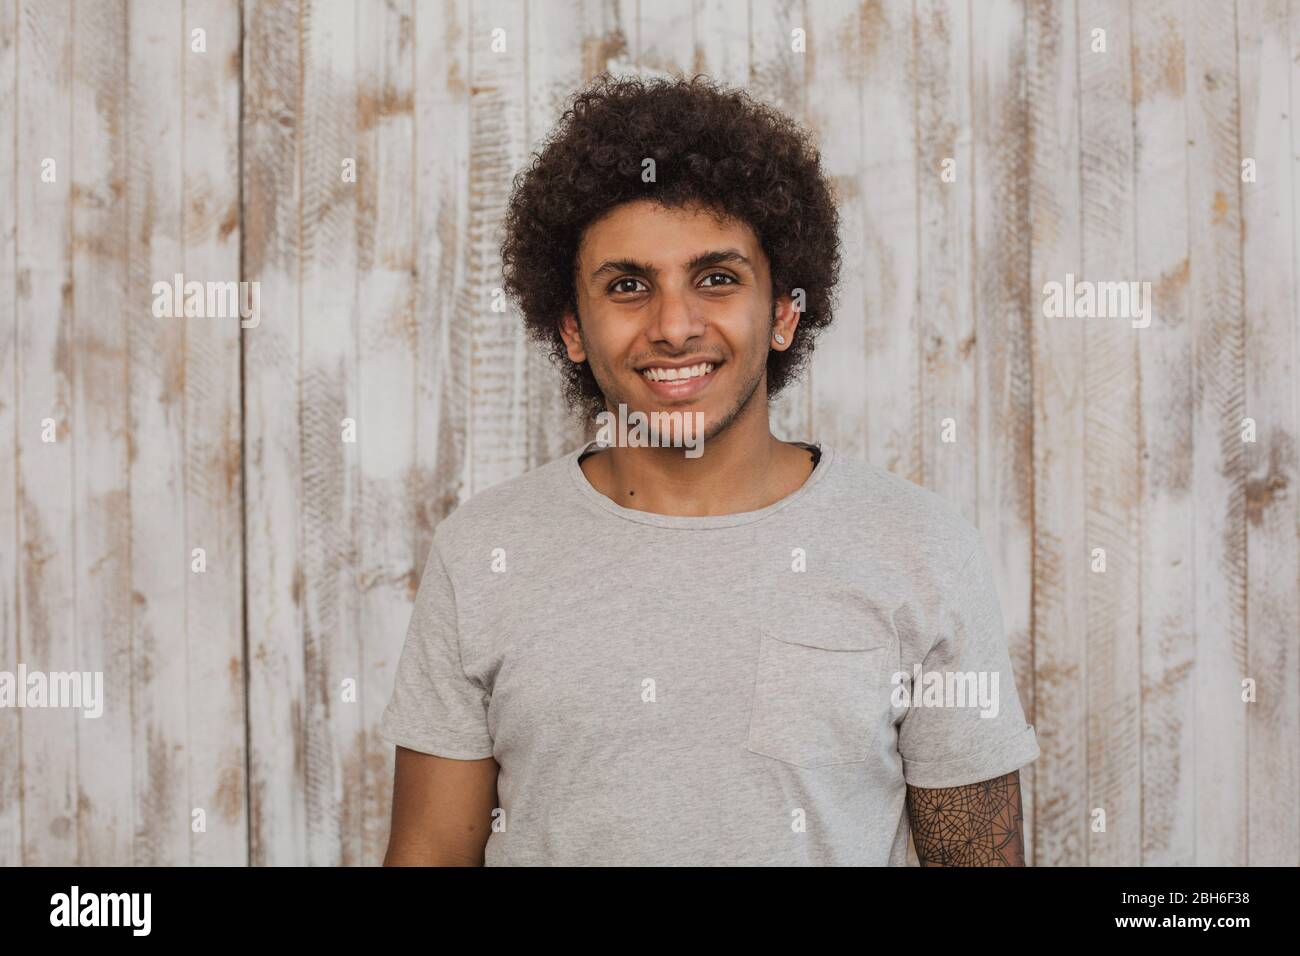 Mulatto with a perfect smile. Portrait cheerful curly haired man looking at the camera, while standing against old wooden background Stock Photo